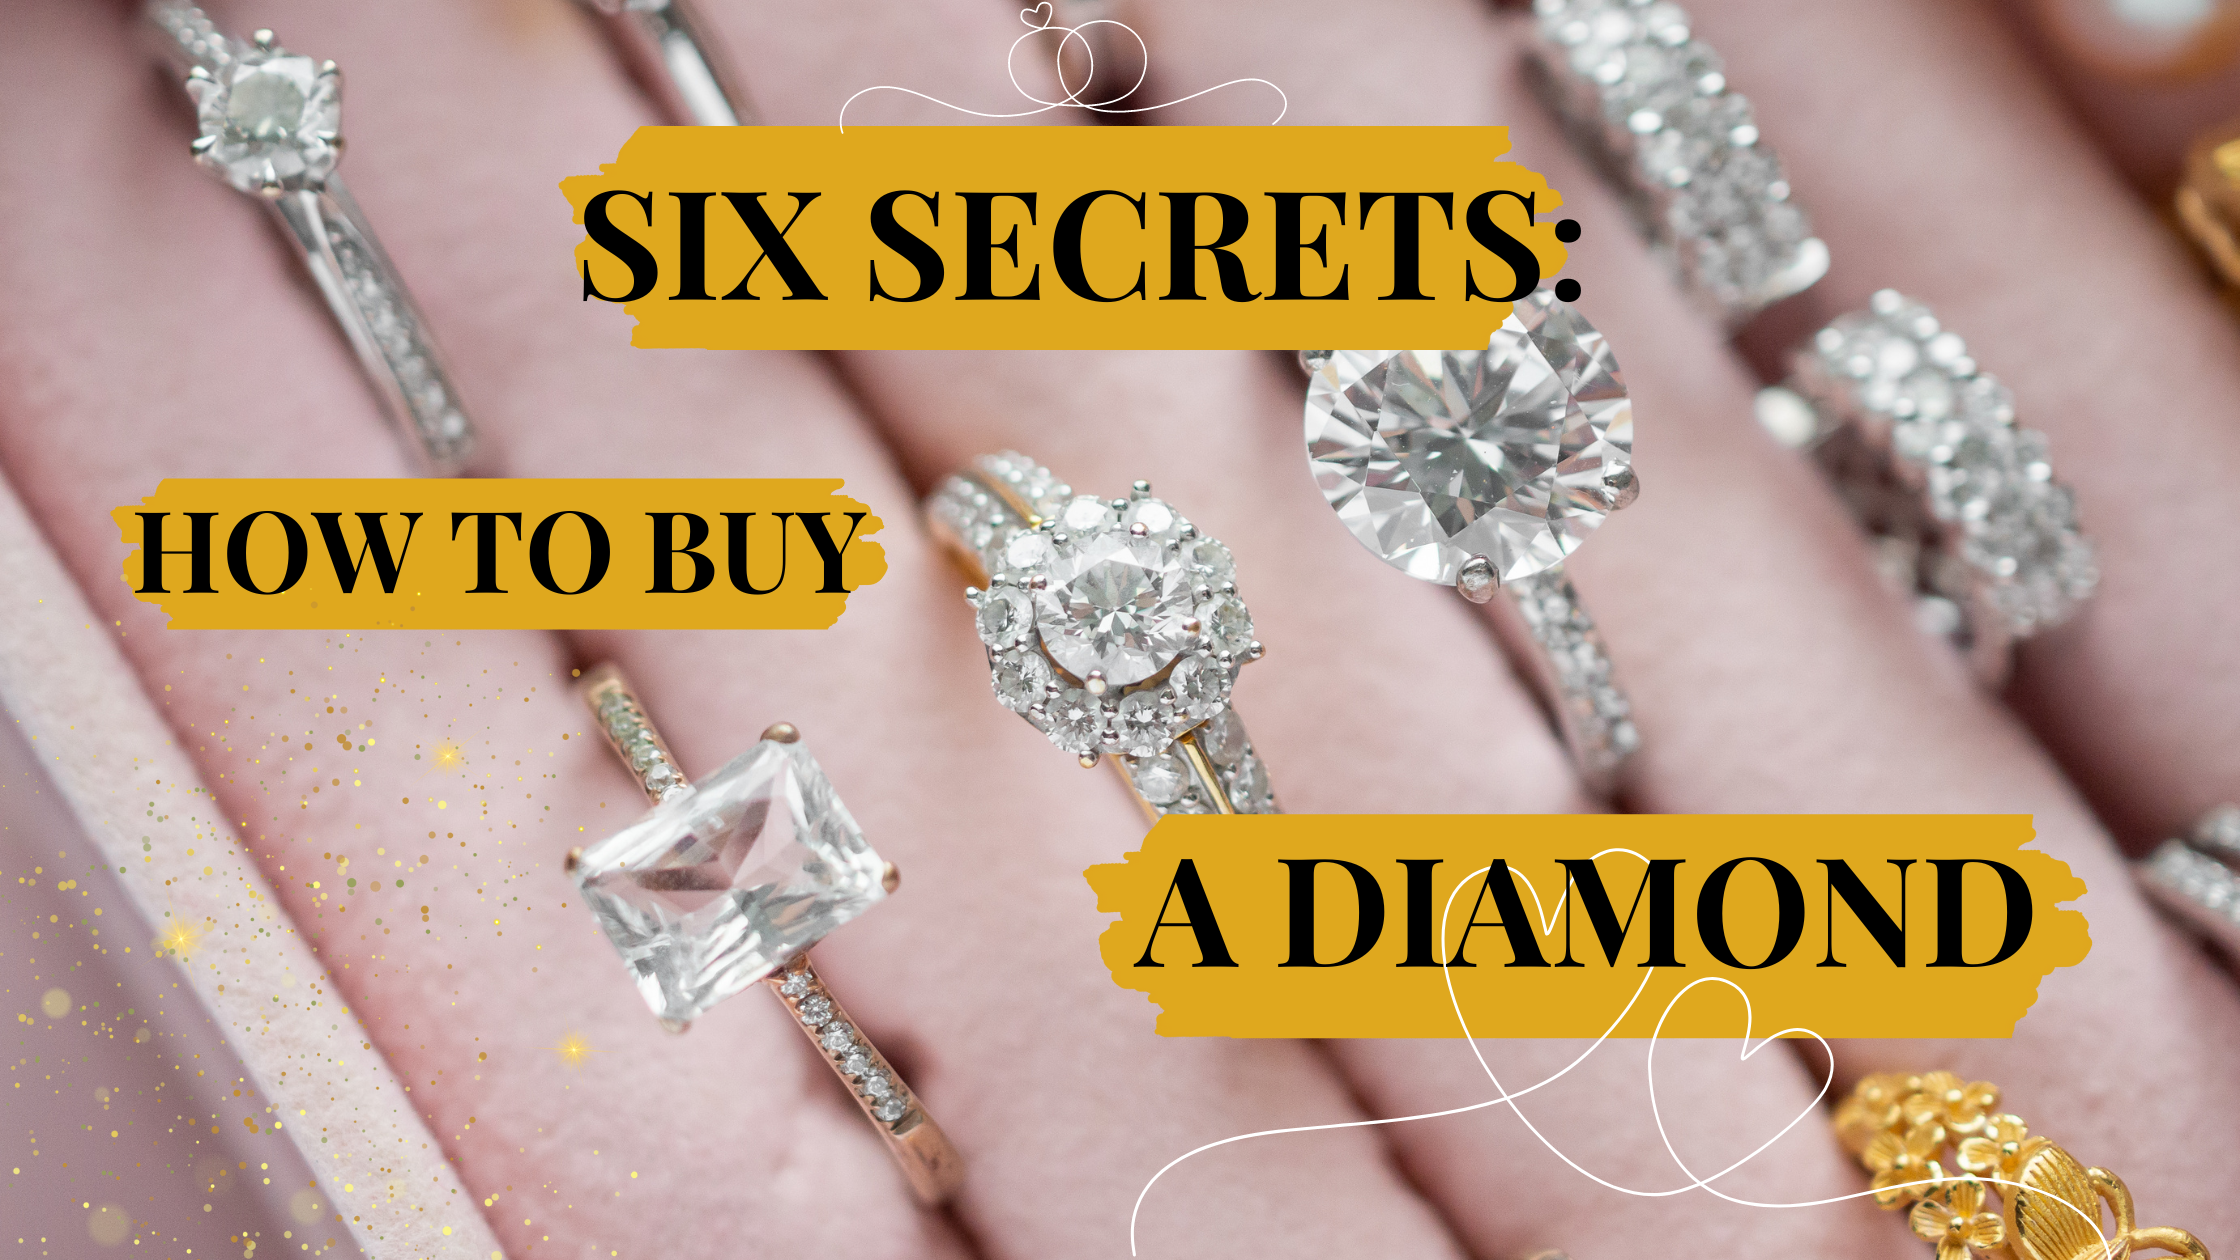 Text 'Six secrets: how to buy a diamond' over picture of diamonds